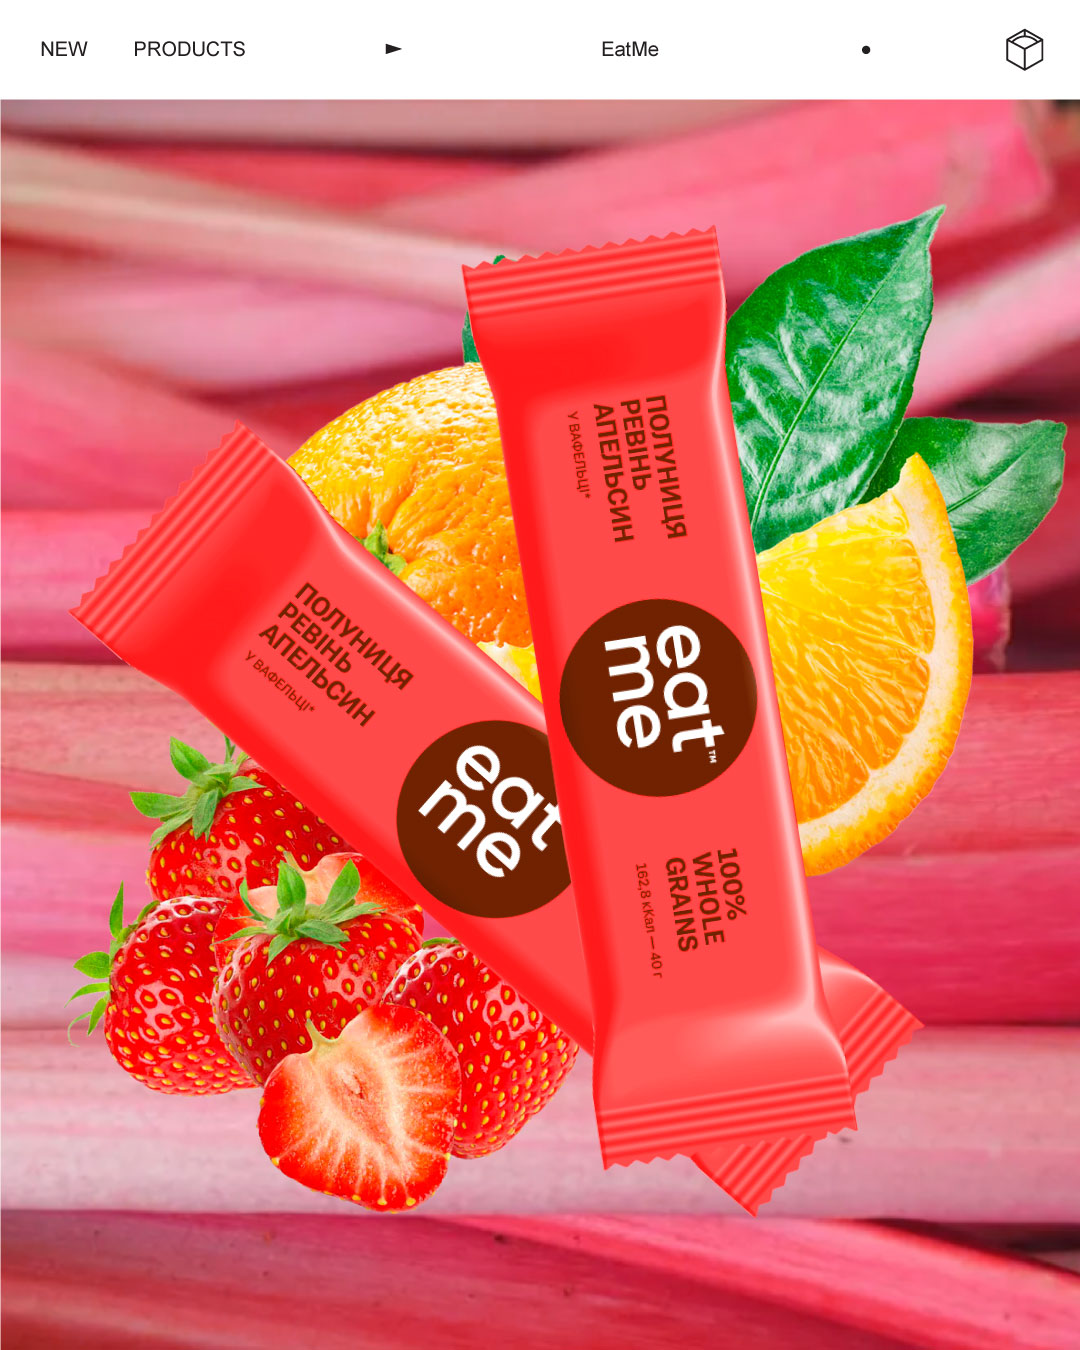 EatMe Launches Strawberry-Rhubarb-Orange Bar with Our Unique Waffle Coating!